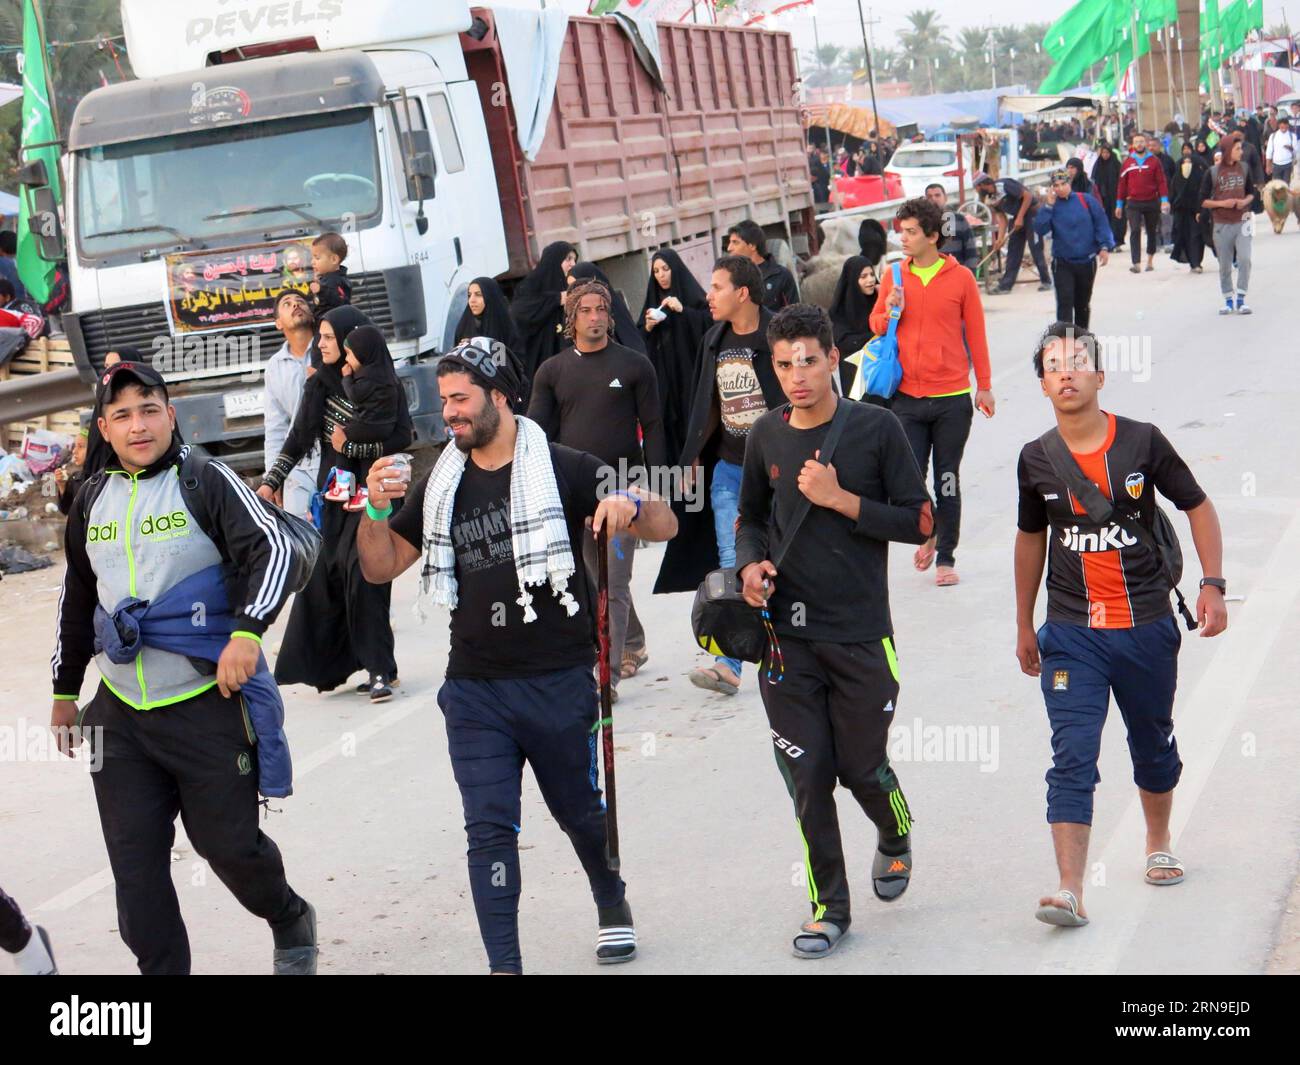 (151201) -- BAGHDAD, Dec. 1, 2015 -- Millions of Shiite Muslim pilgrims walk to the Iraqi shrine city of Karbala for the climax of annual Arbaeen mourning rituals in Baghdad, Iraq, Dec. 1, 2015.) IRAQ-BAGHDAD-IMAM HUSSEIN-COMMEMORATION KhalilxDawood PUBLICATIONxNOTxINxCHN   151201 Baghdad DEC 1 2015 Millions of Shiite Muslim PilgrimS Walk to The Iraqi Shrine City of Karbala for The Climax of Annual Arbaeen Mourning Ritual in Baghdad Iraq DEC 1 2015 Iraq Baghdad Imam Hussein Commemoration KhalilxDawood PUBLICATIONxNOTxINxCHN Stock Photo